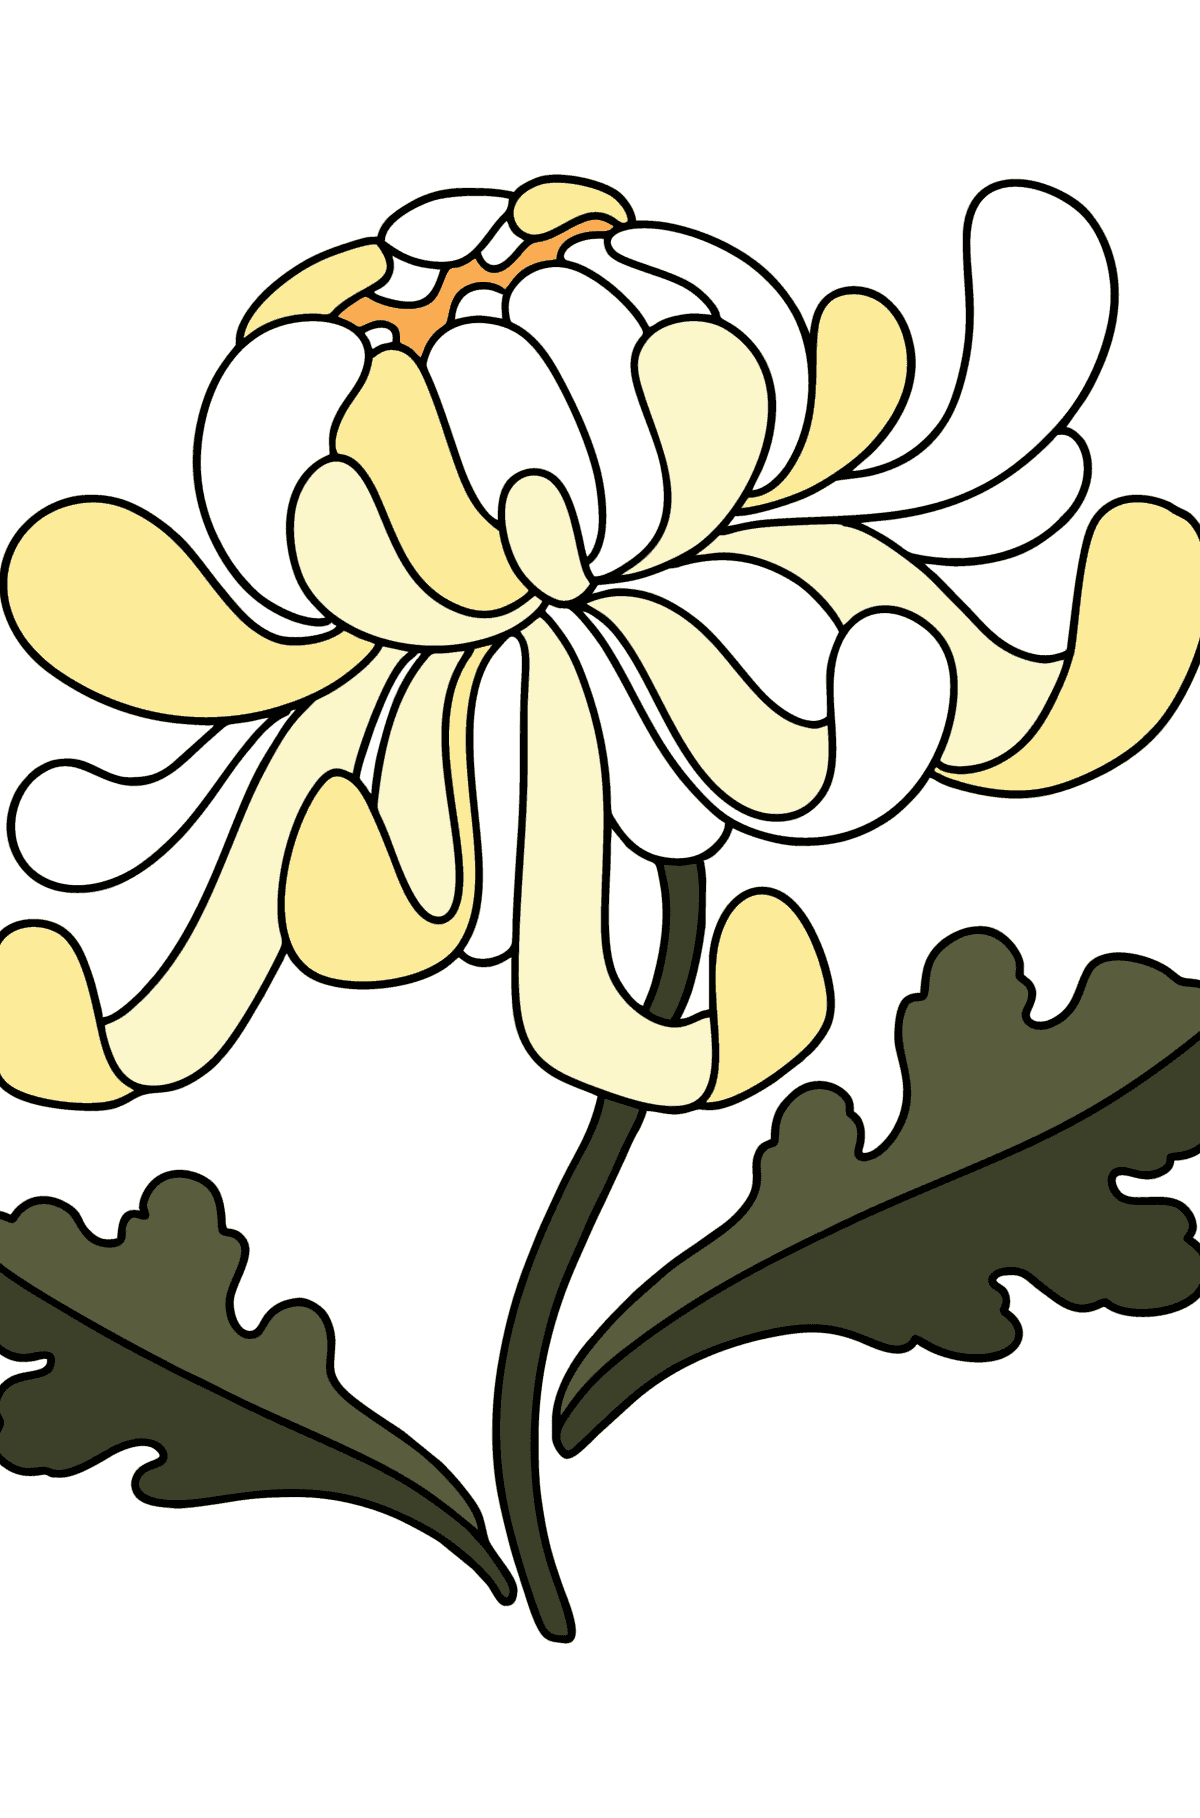 Chrysanthemums coloring page - Coloring Pages for Kids